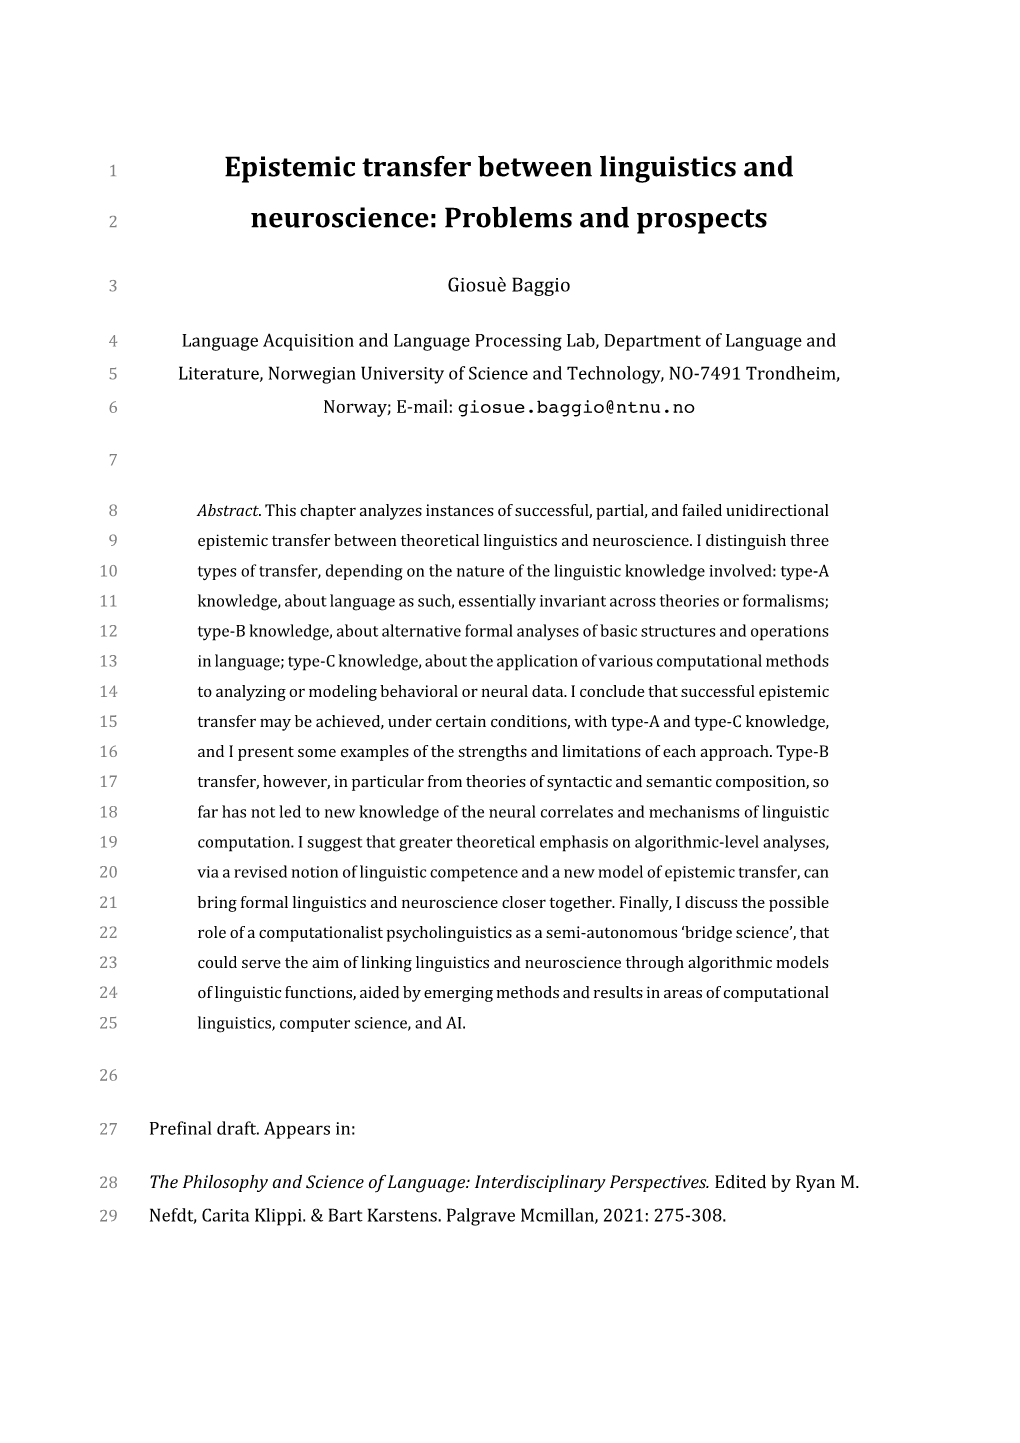 Epistemic Transfer Between Linguistics and Neuroscience: Problems and Prospects